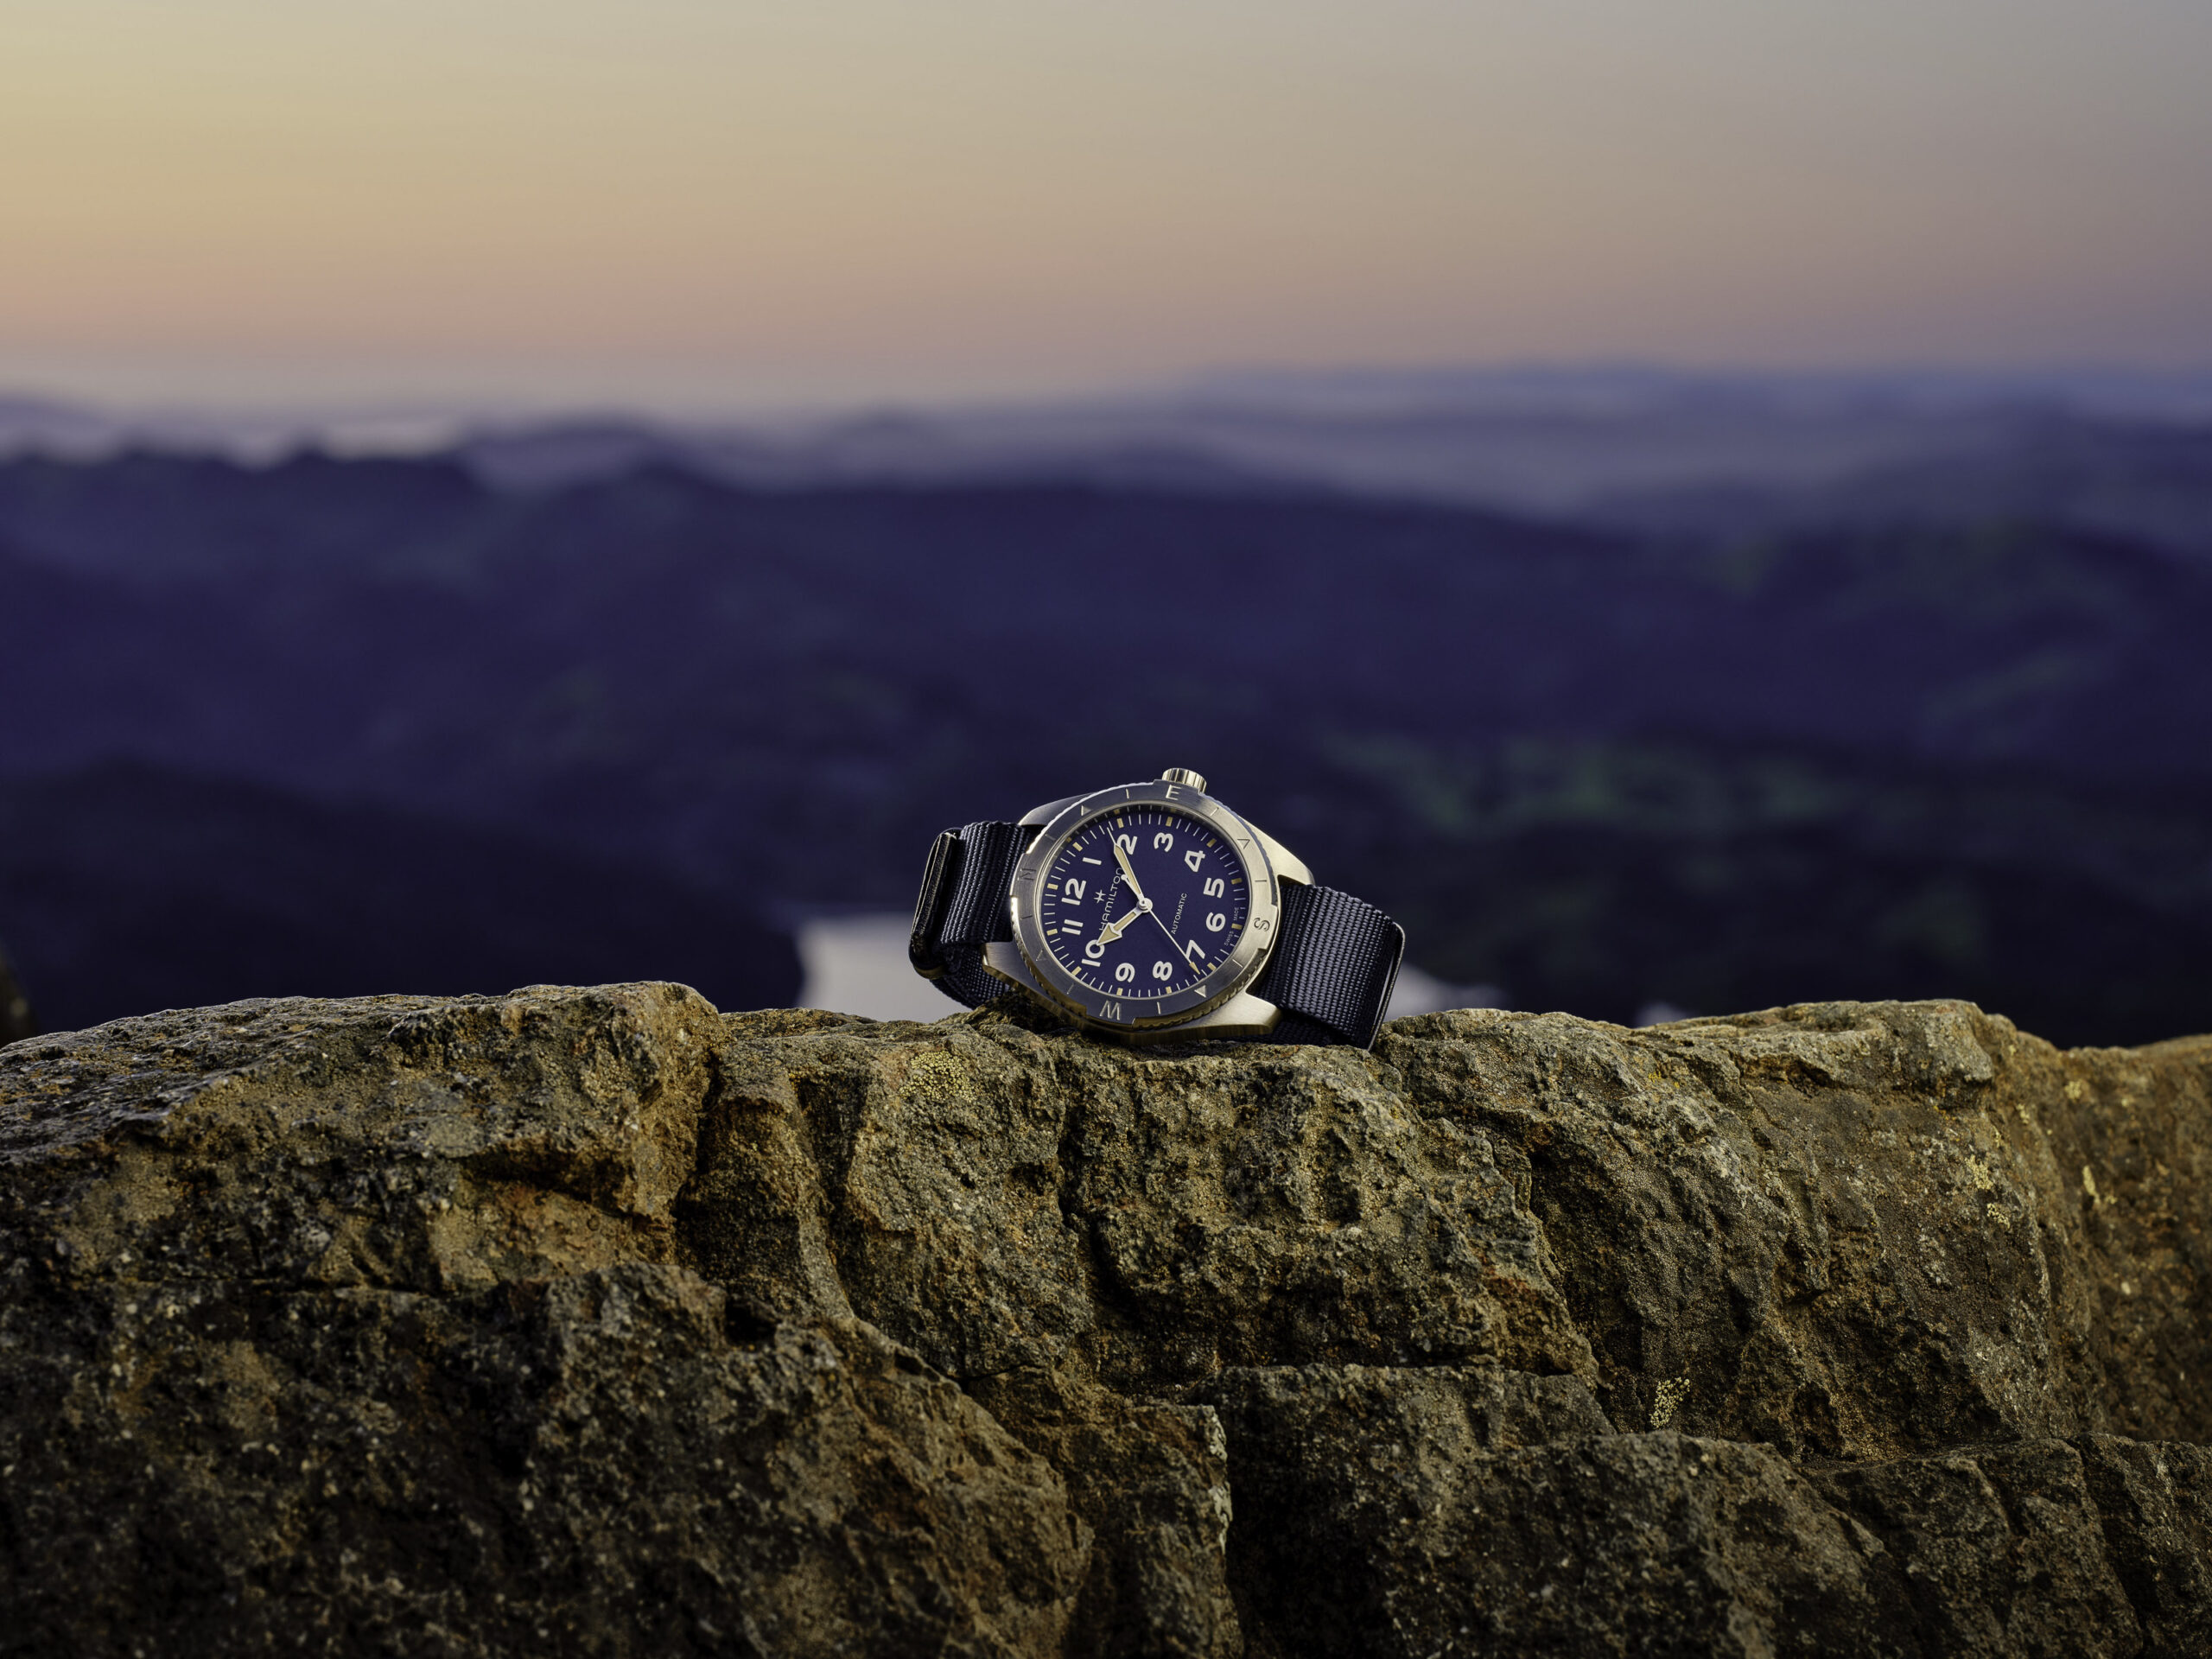 Introducing Five New Styles of the Hamilton Khaki Field Expedition